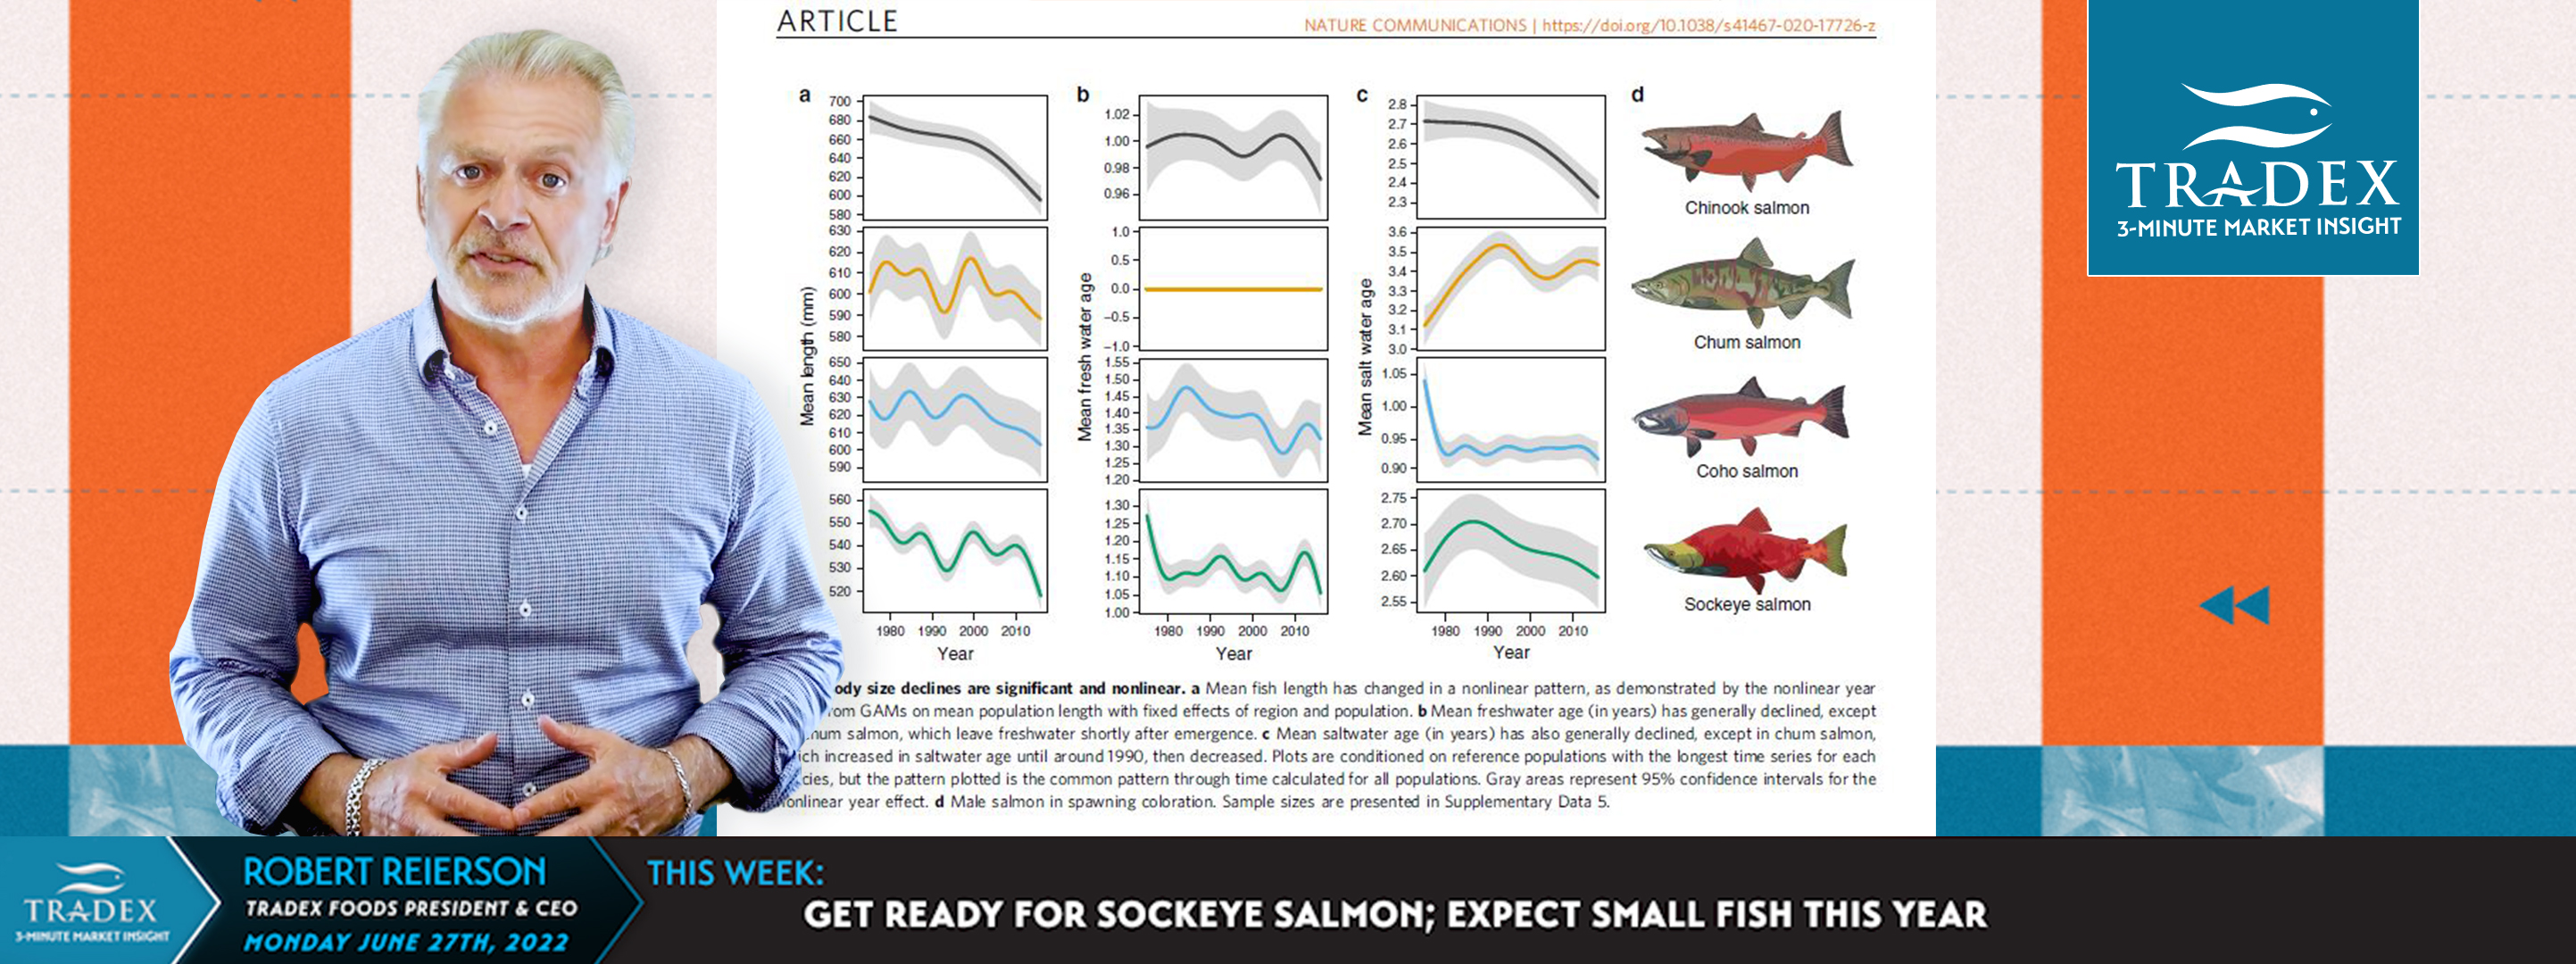 Get Ready for Sockeye Salmon; Expect Small Fish This Year